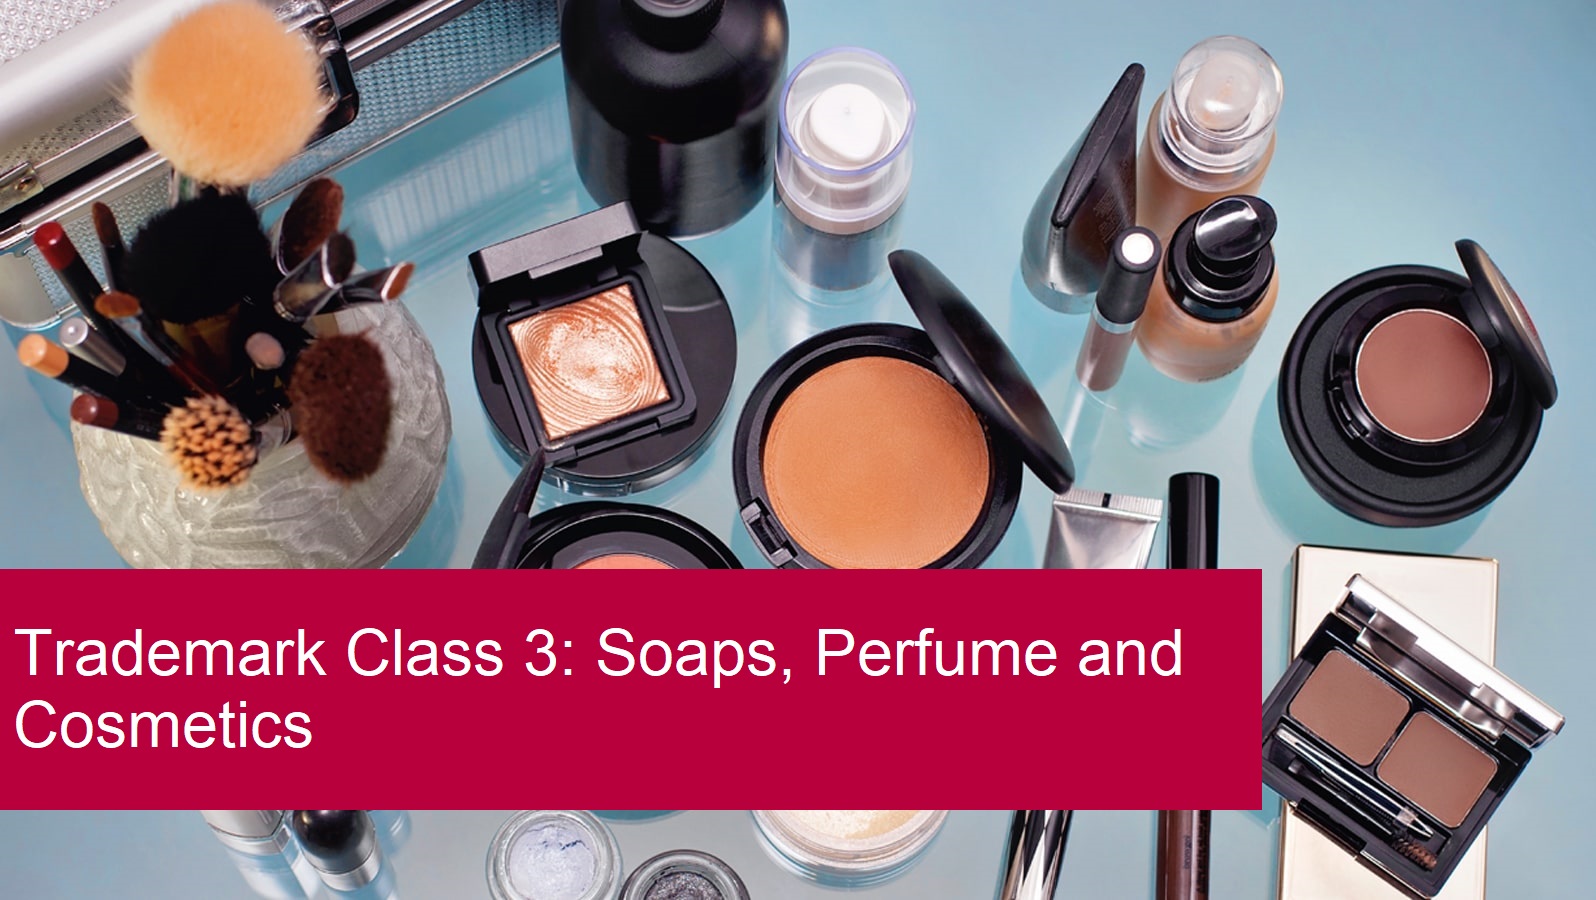 TRADEMARK CLASS 3- SOAPS, PERFUMES AND COSMETICS